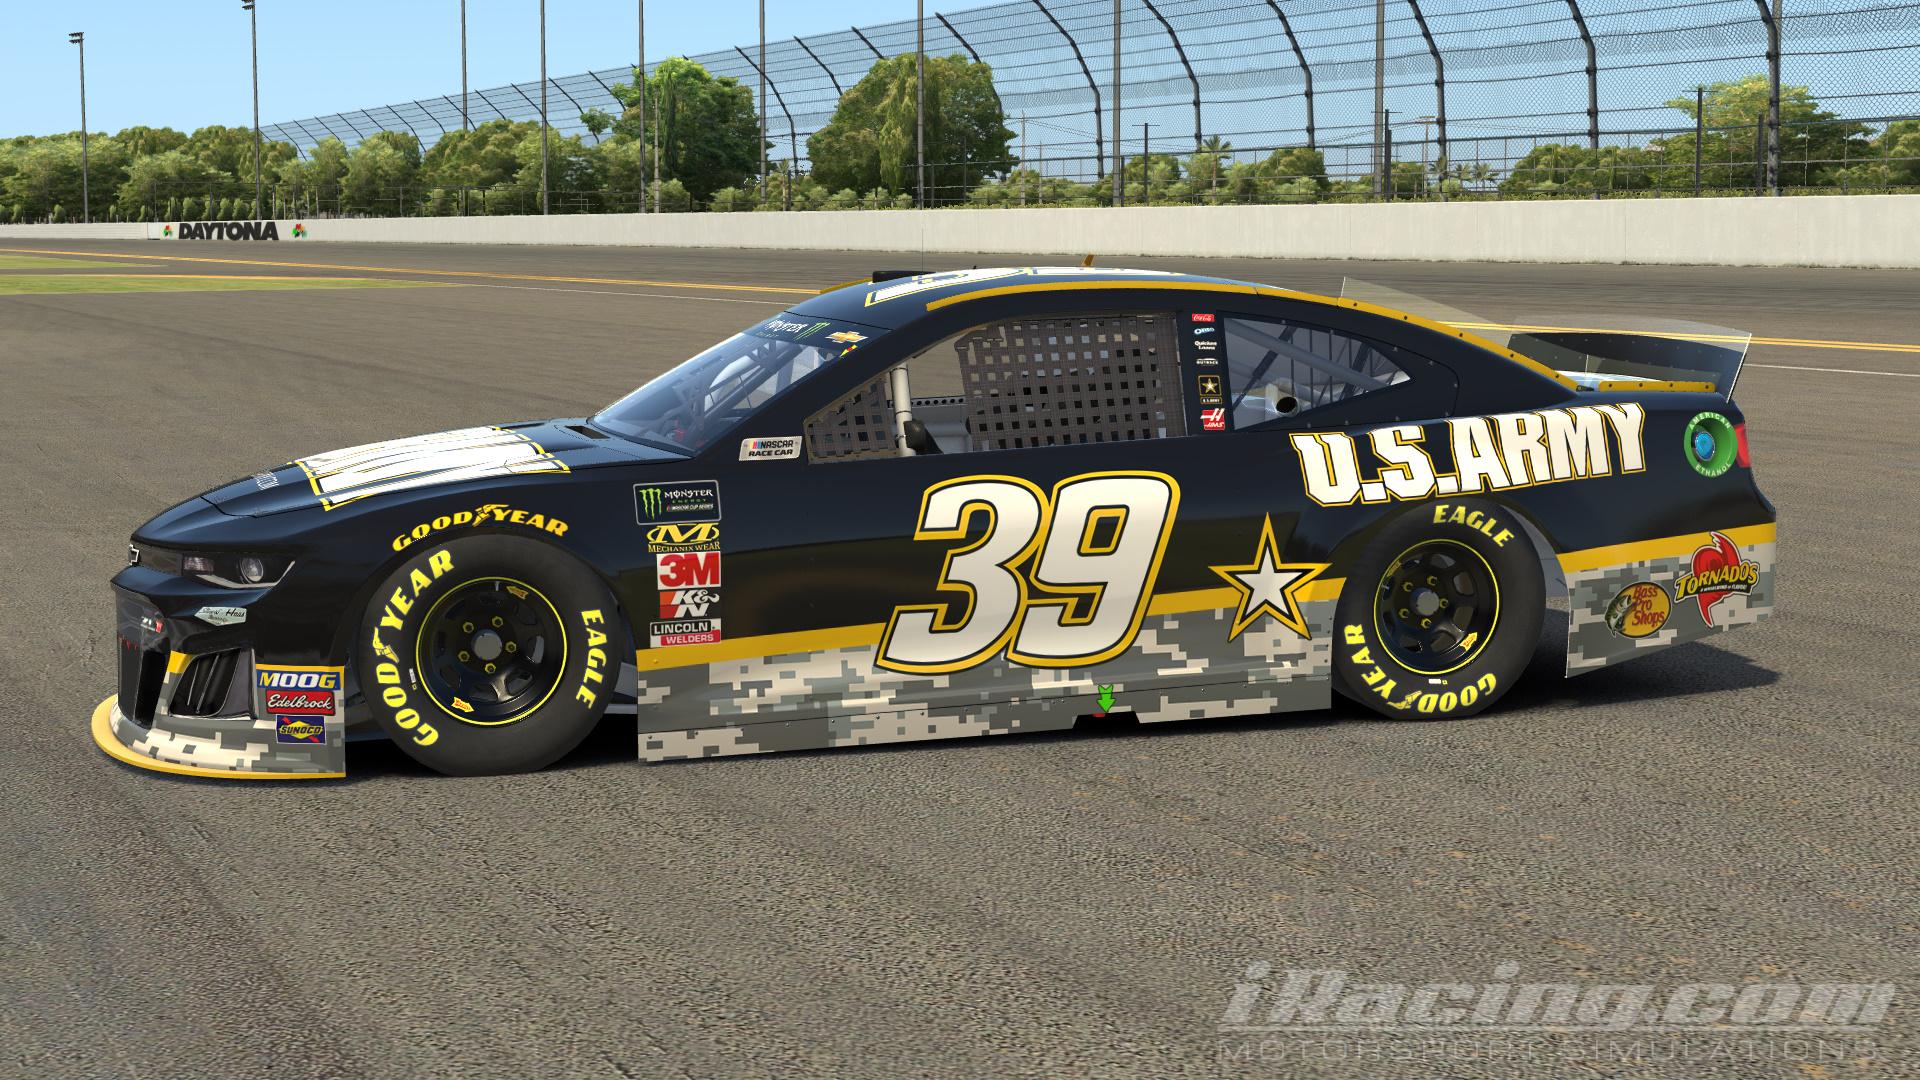 Preview of Ryan Newman - U.S. Army Chevrolet Camaro by Mike E Holloway